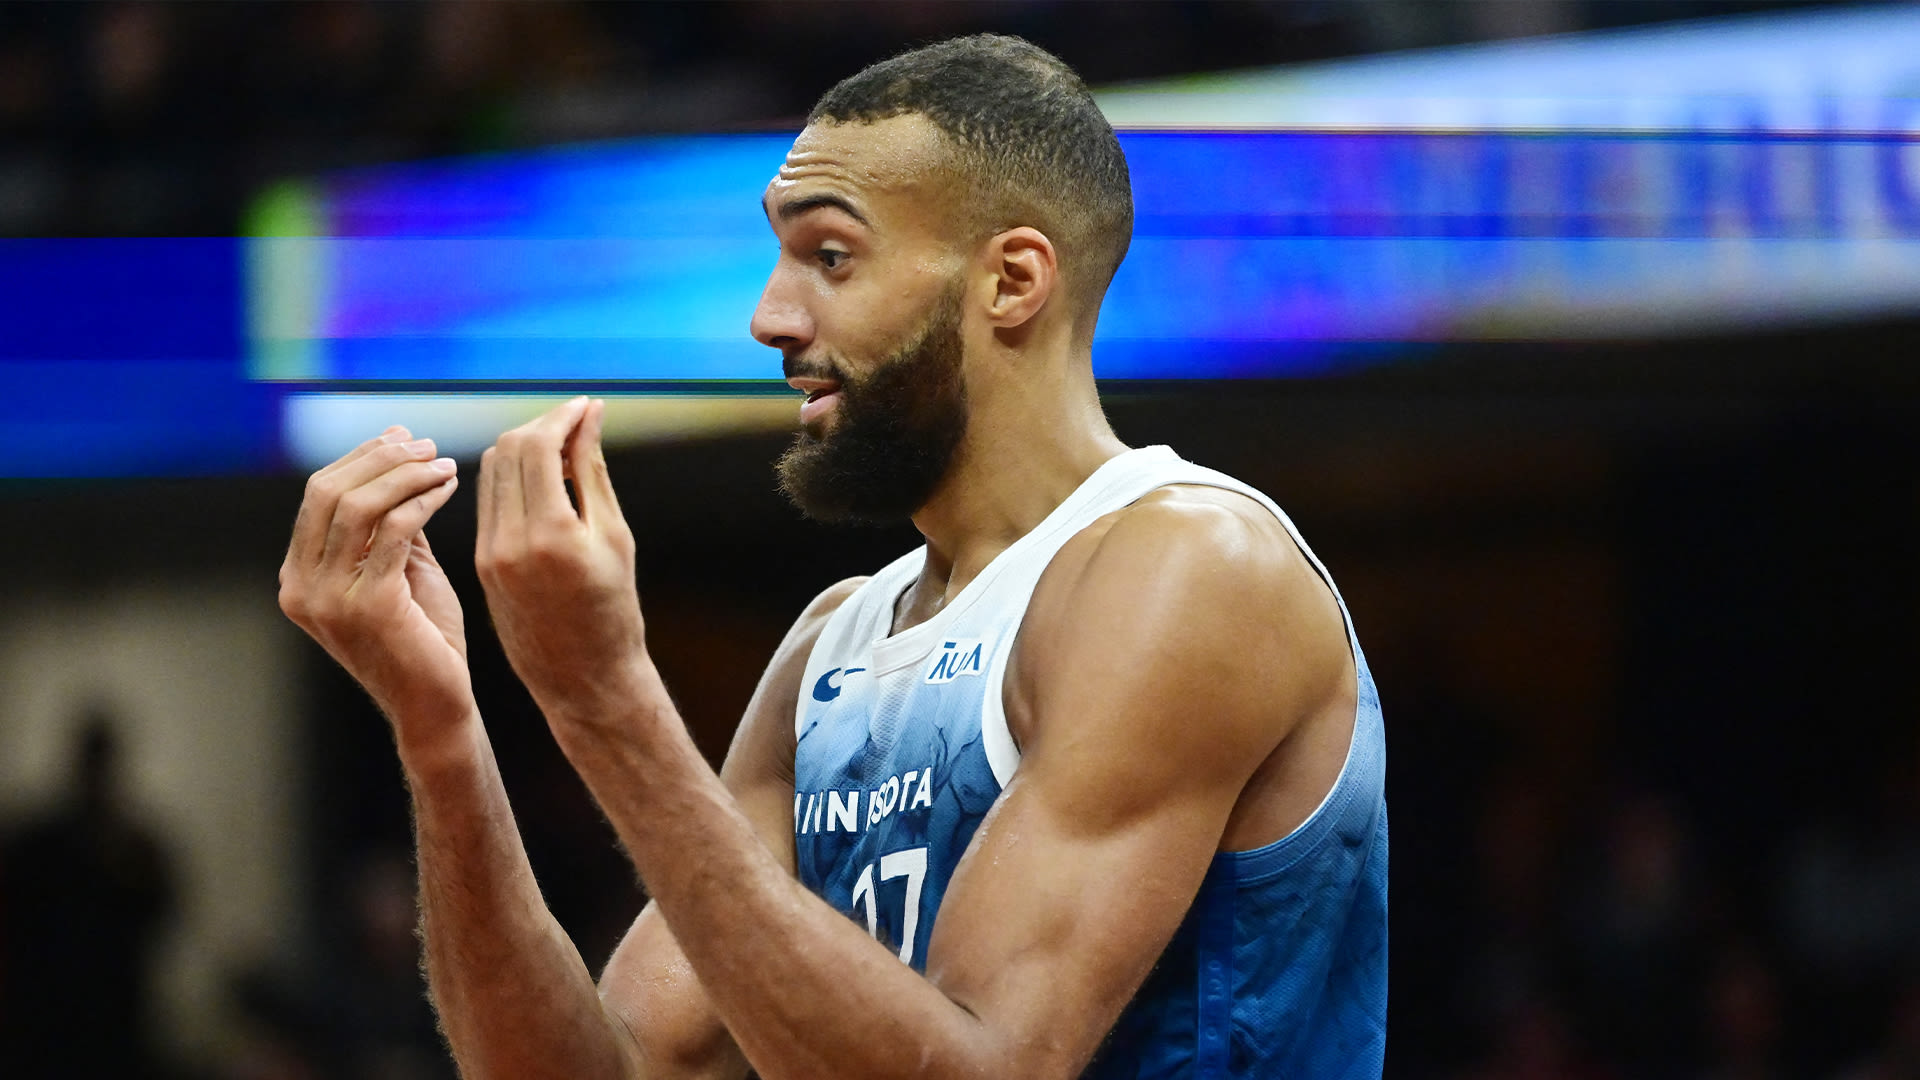 All we know about the meaning of Rudy Gobert's money celebration gesture